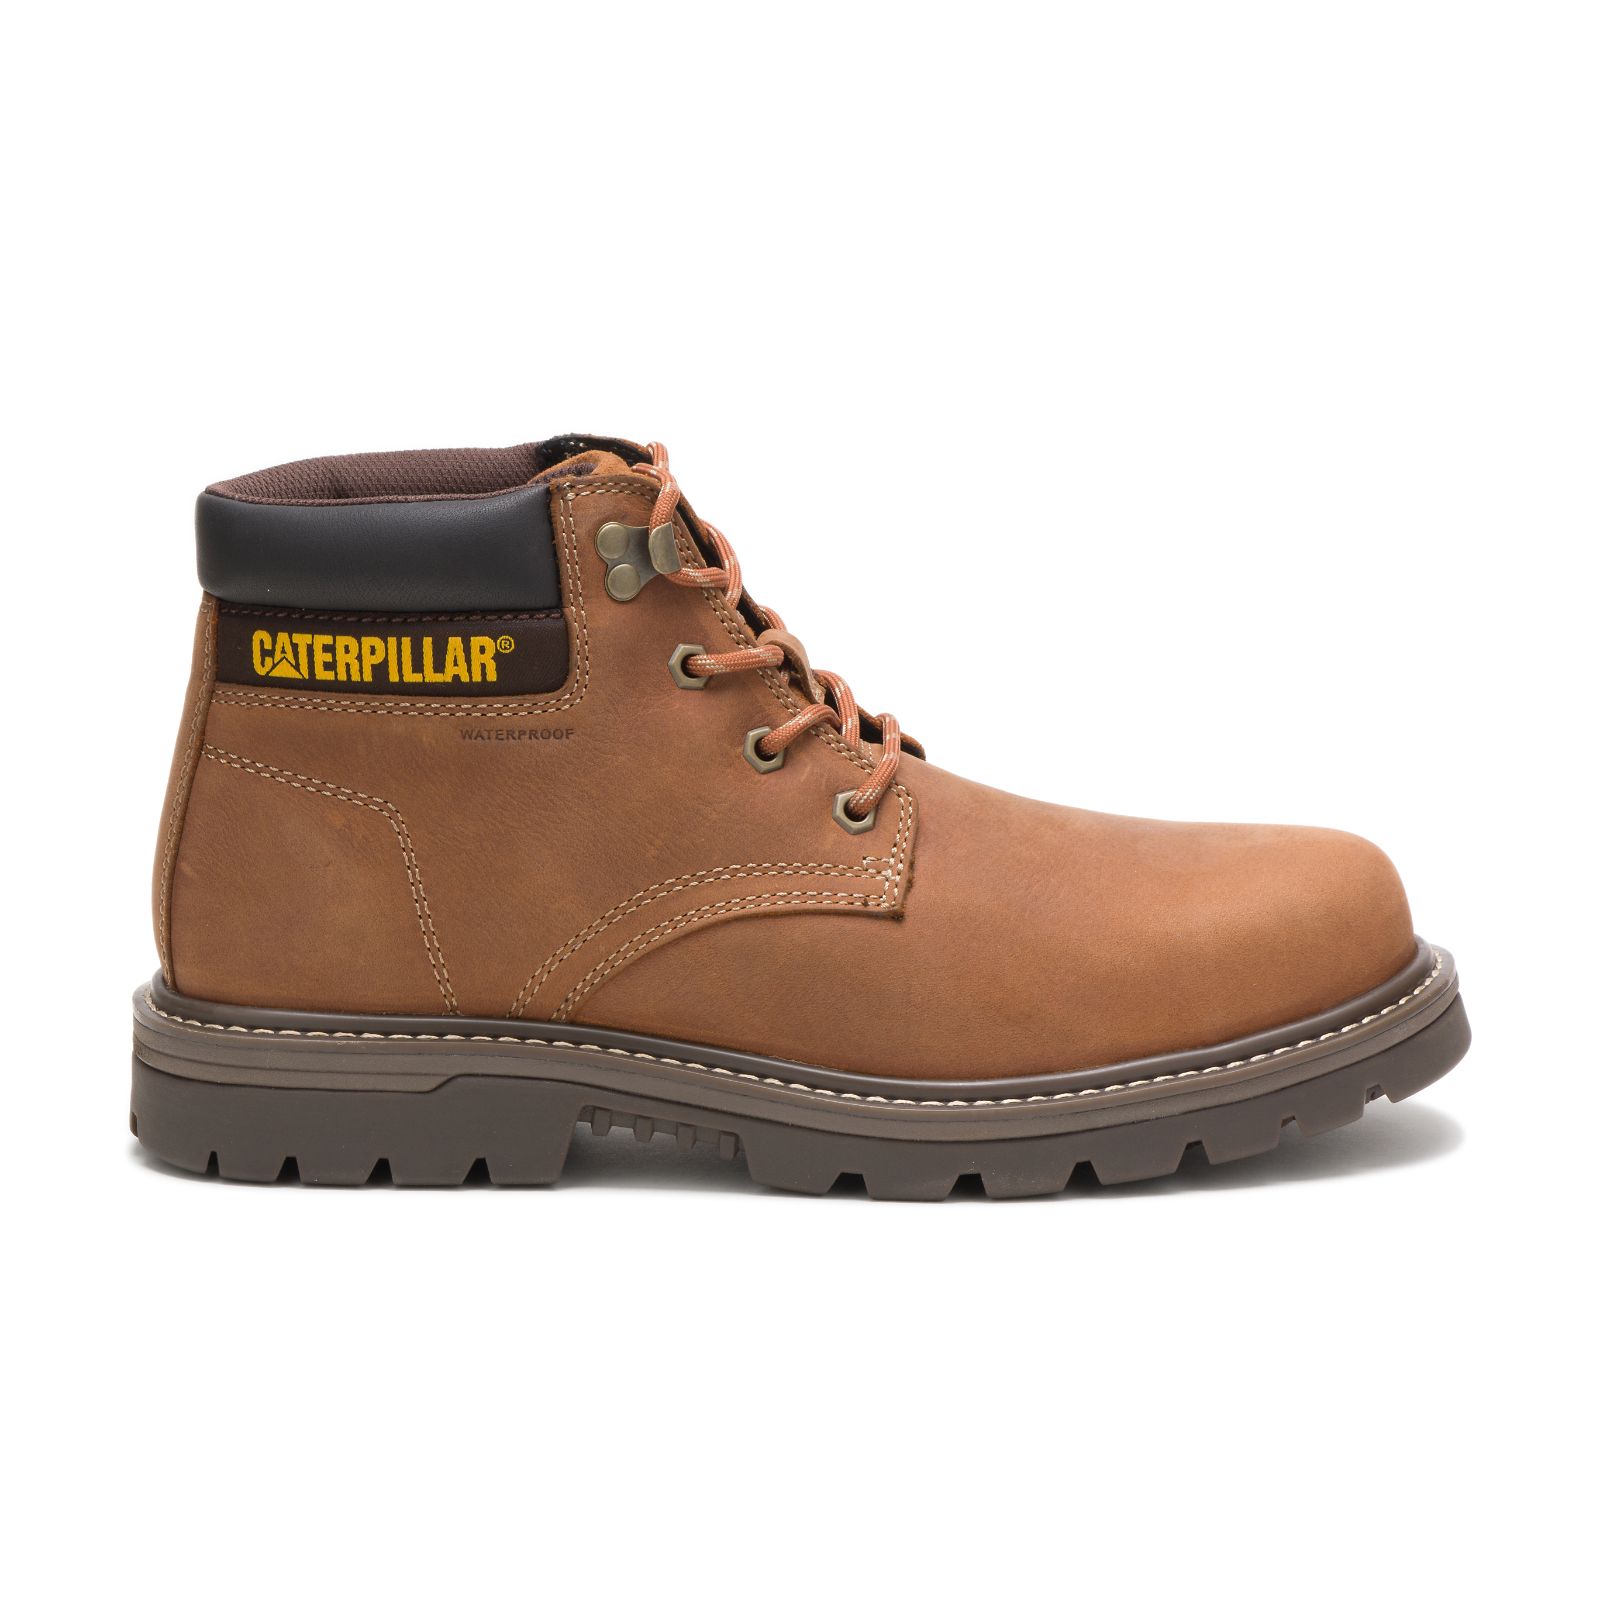 Caterpillar Boots Islamabad - Caterpillar Outbase Waterproof Steel Toe Mens Work Boots Brown (310629-BNH)